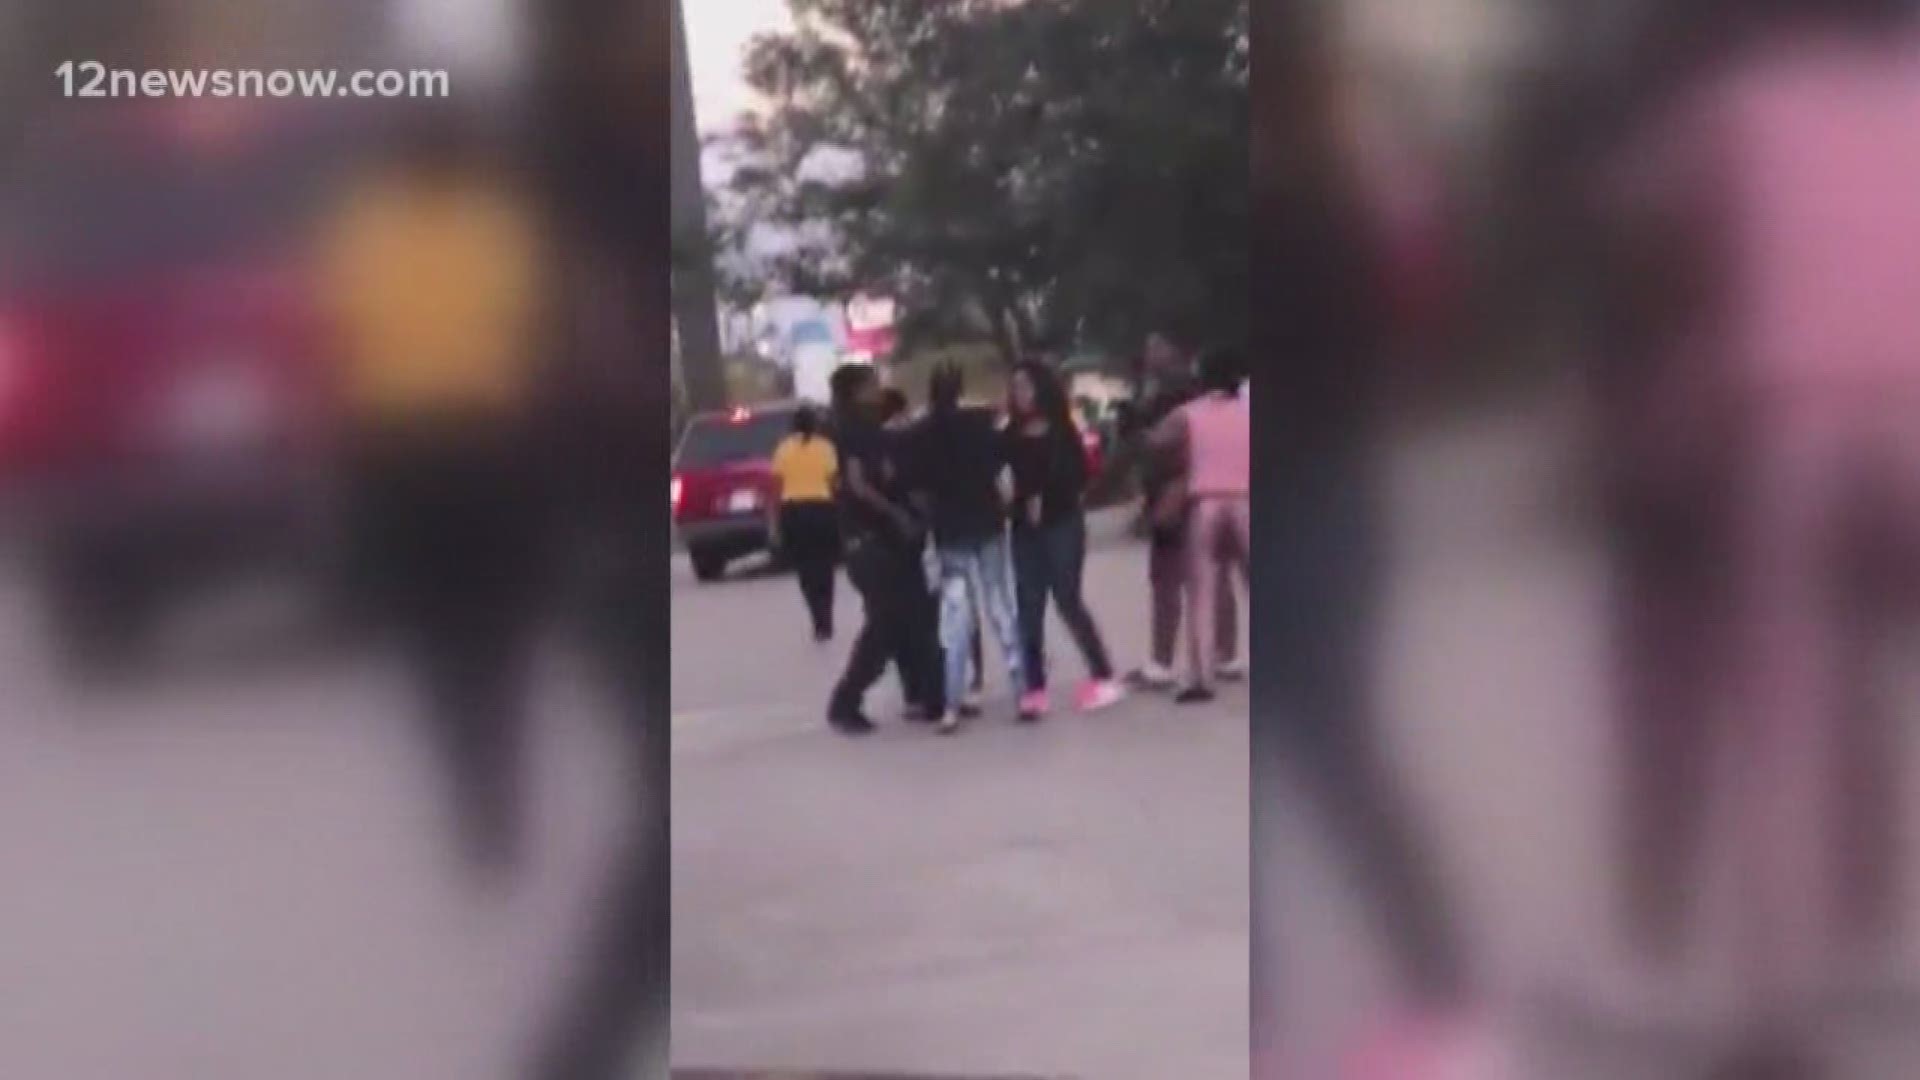 Video captures brawl outside Chuck E. Cheese's in Beaumont